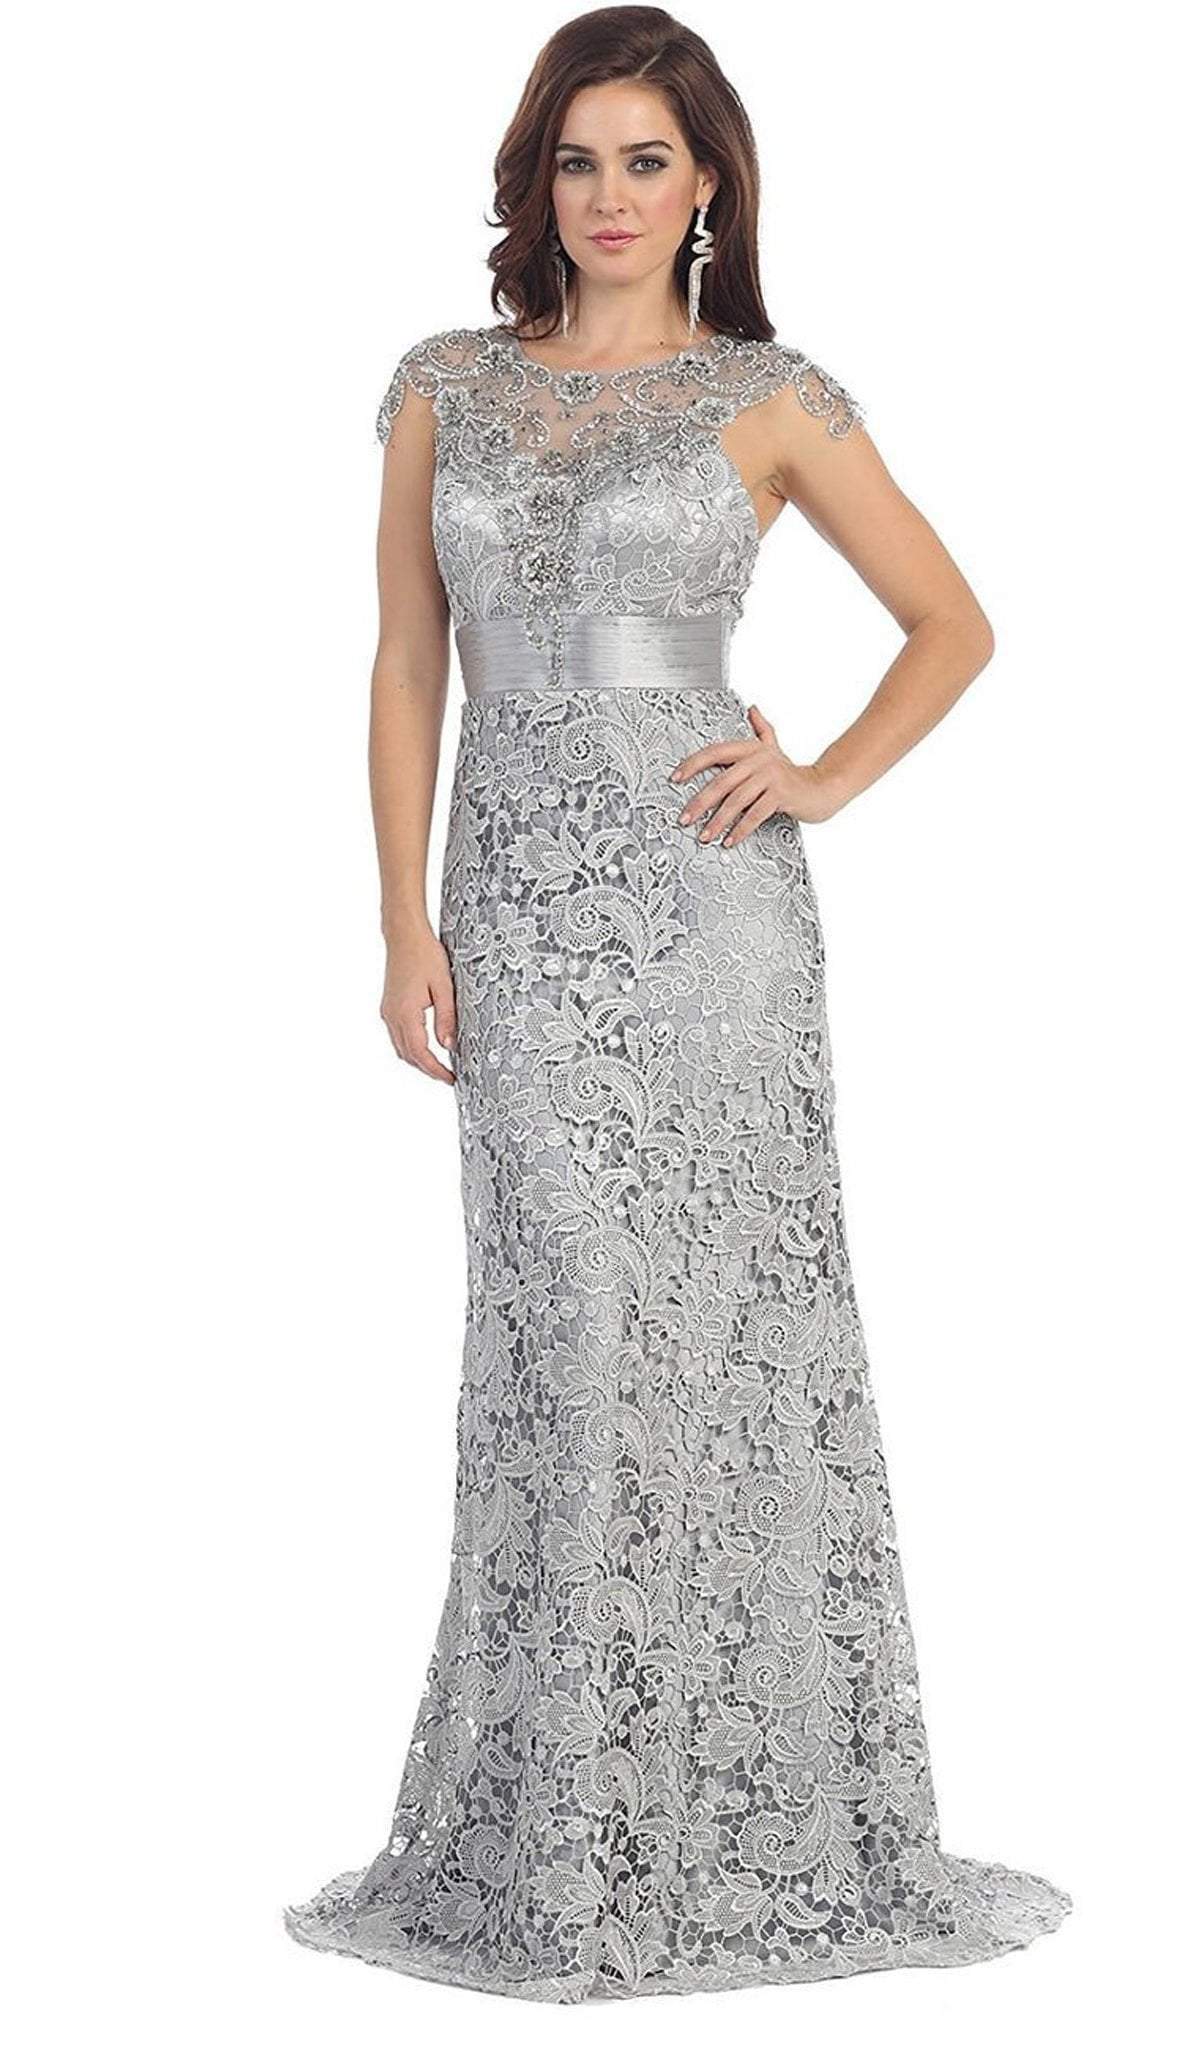 May Queen - RQ7182 Rhinestone Lace Floral Evening Gown Special Occasion Dress 6 / Silver